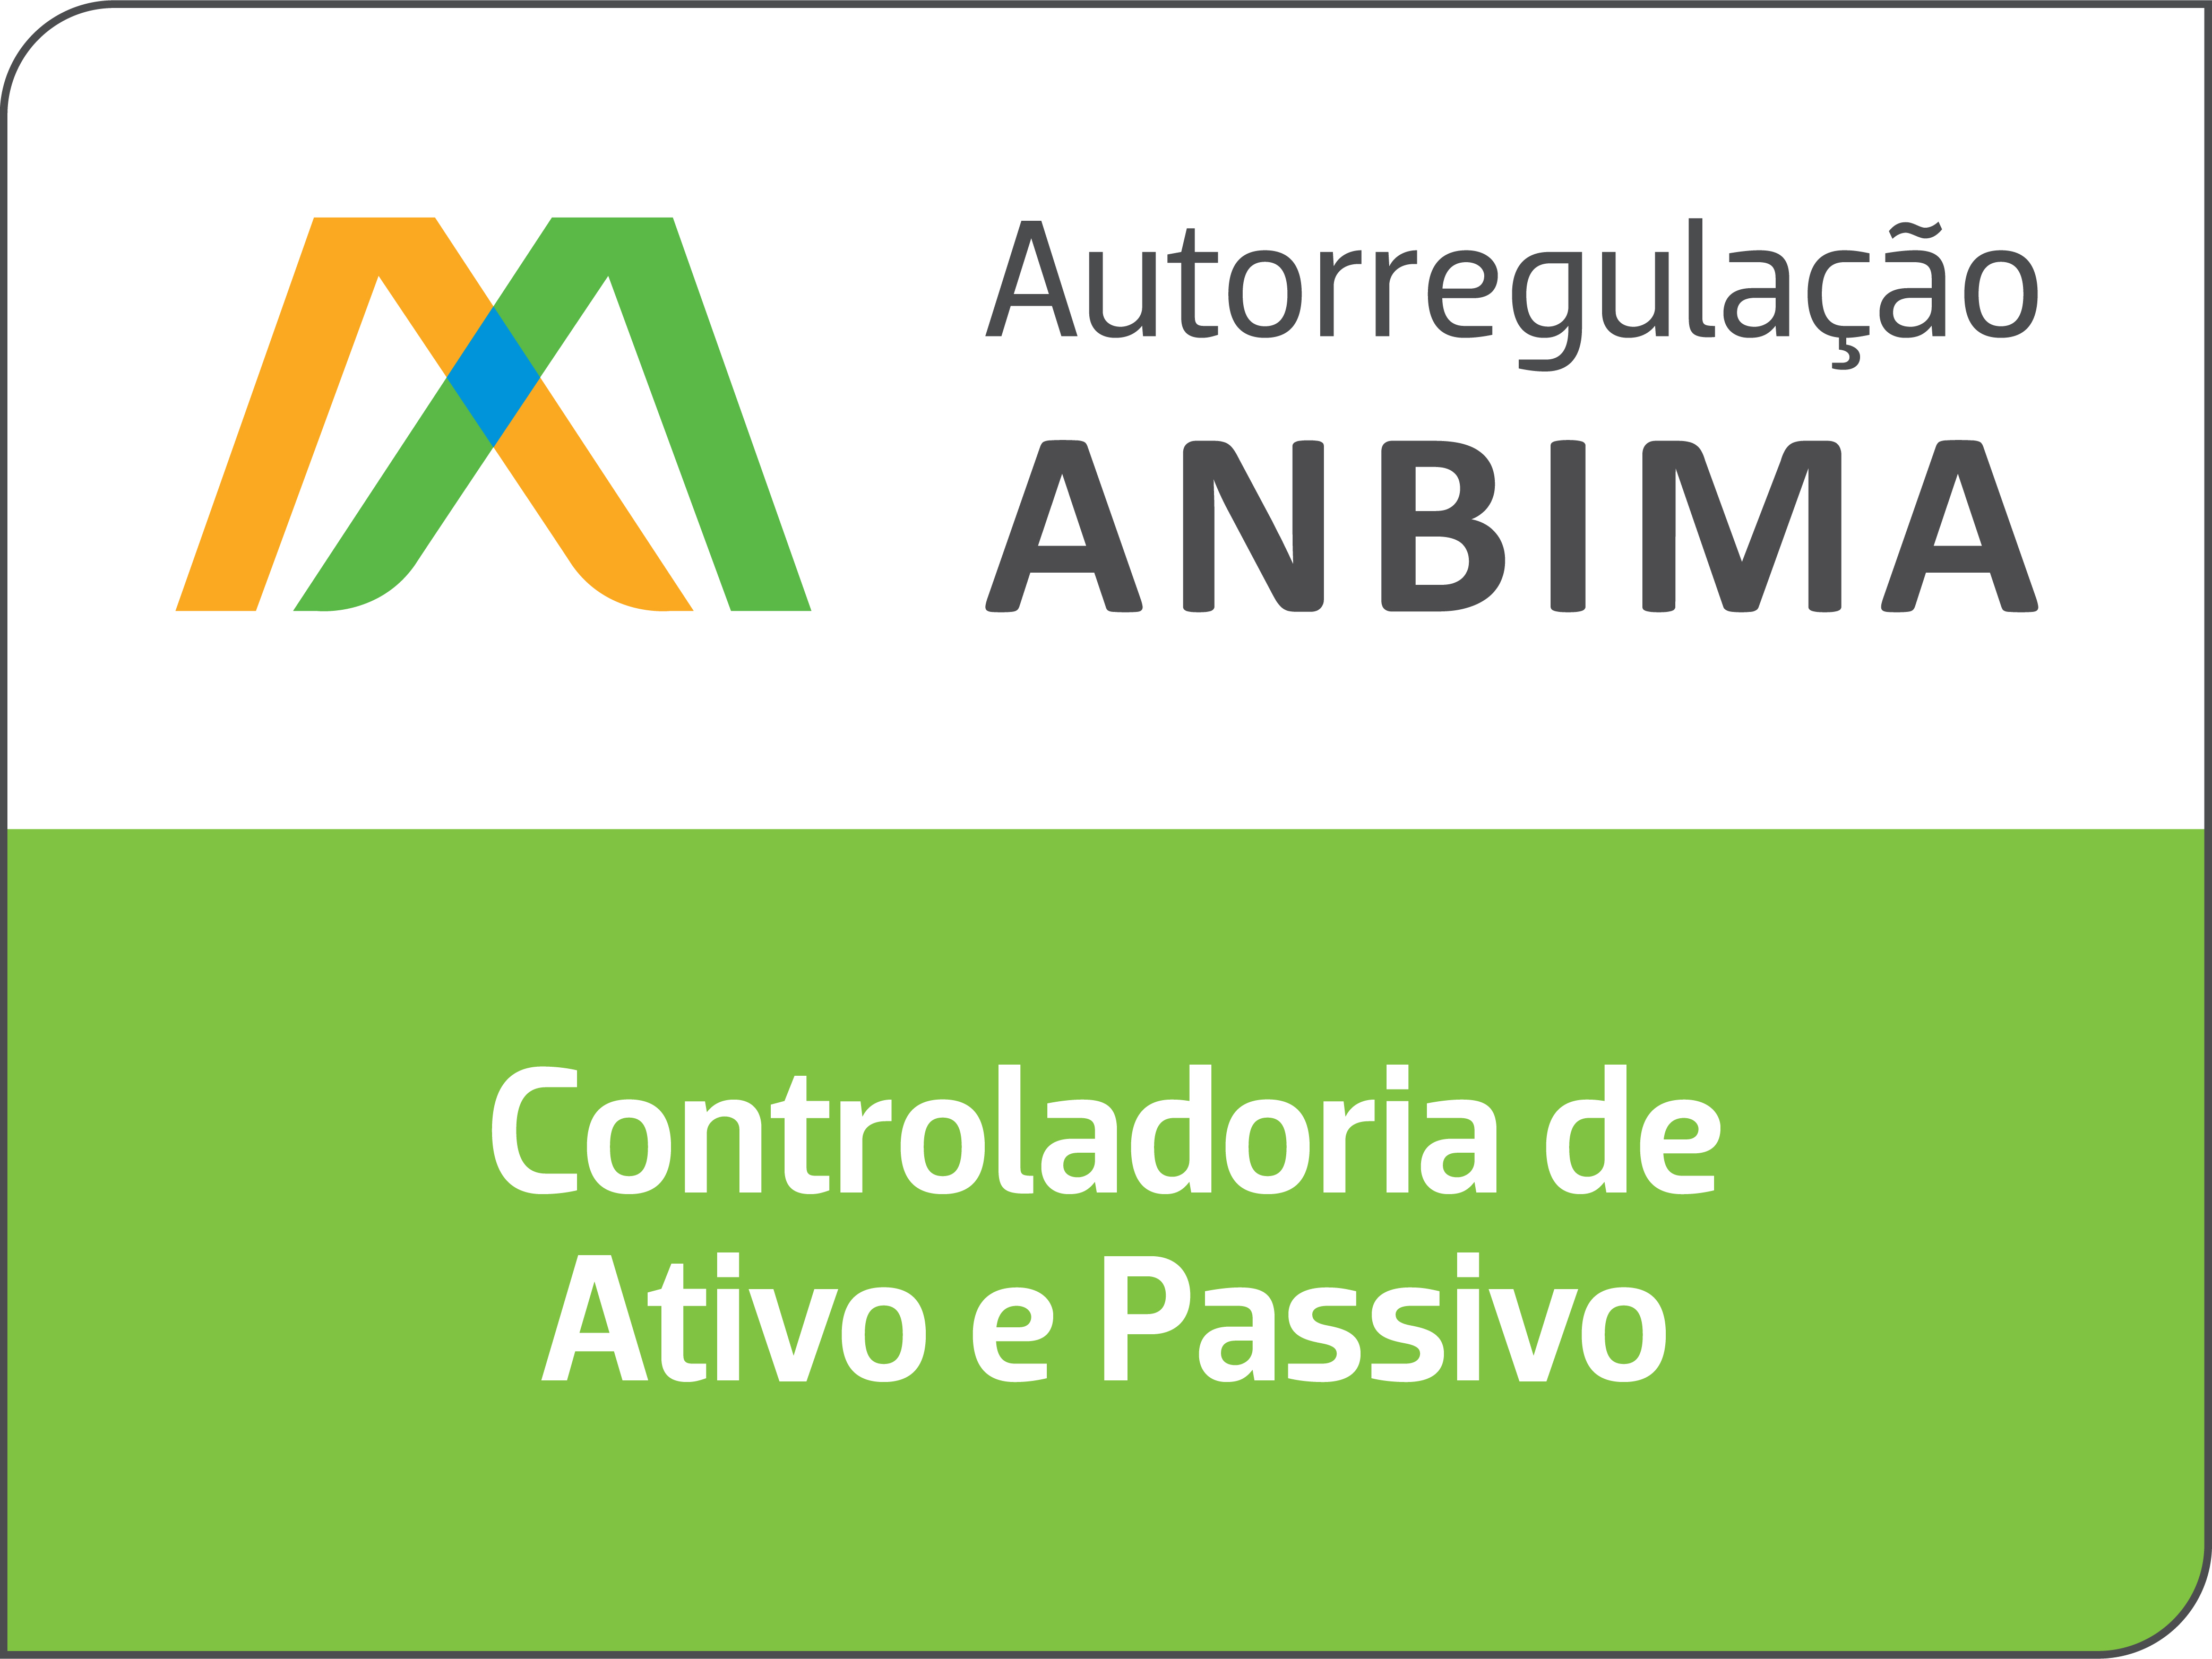 AMBIMA Logo - Comptroller of Permanent Assets and Liabilities